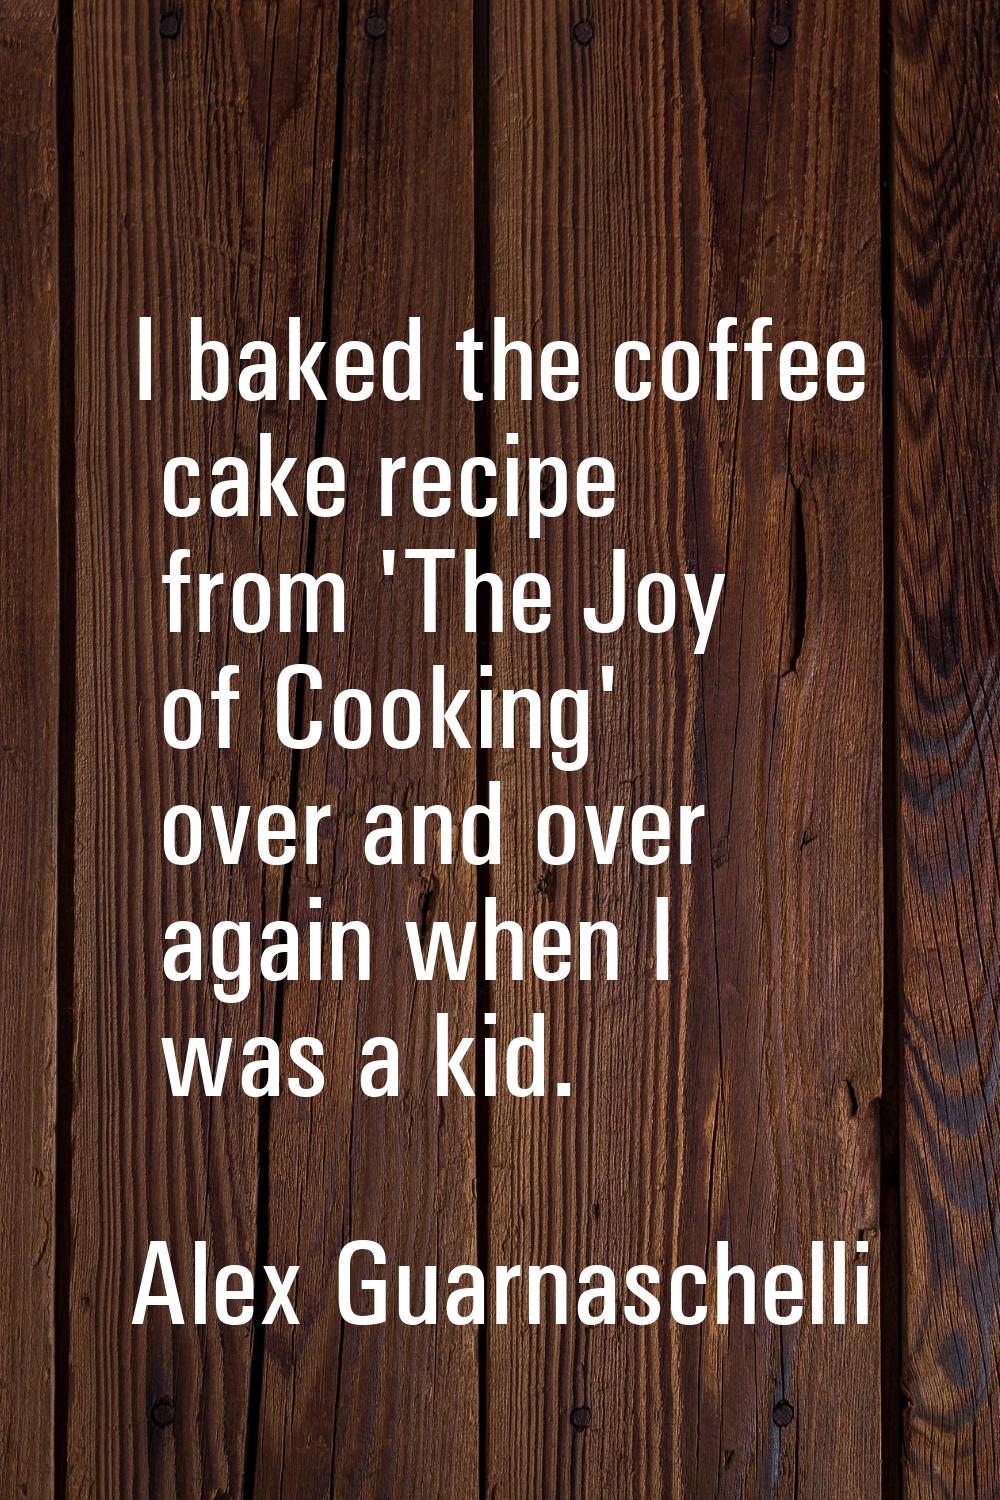 I baked the coffee cake recipe from 'The Joy of Cooking' over and over again when I was a kid.